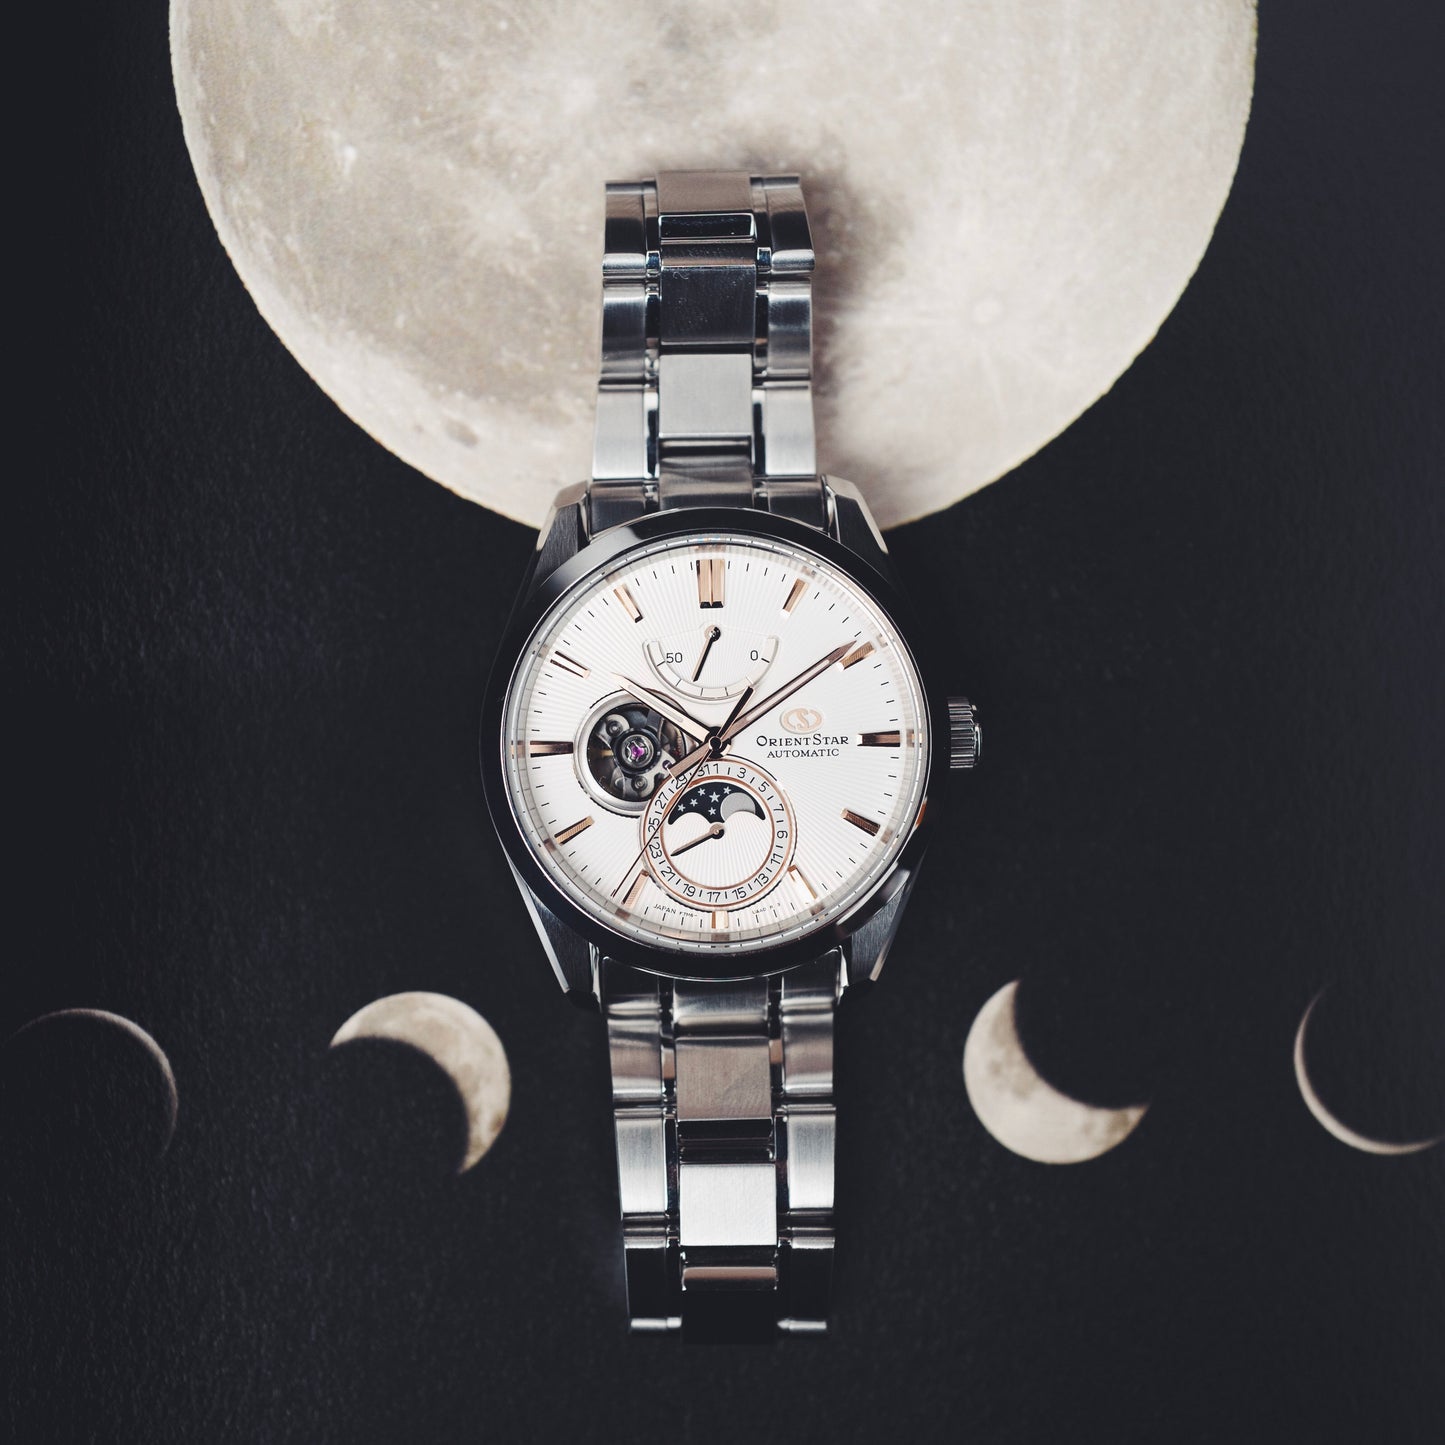 Orient Star : Mechanical Moon Phase - RE-AY0003S00B